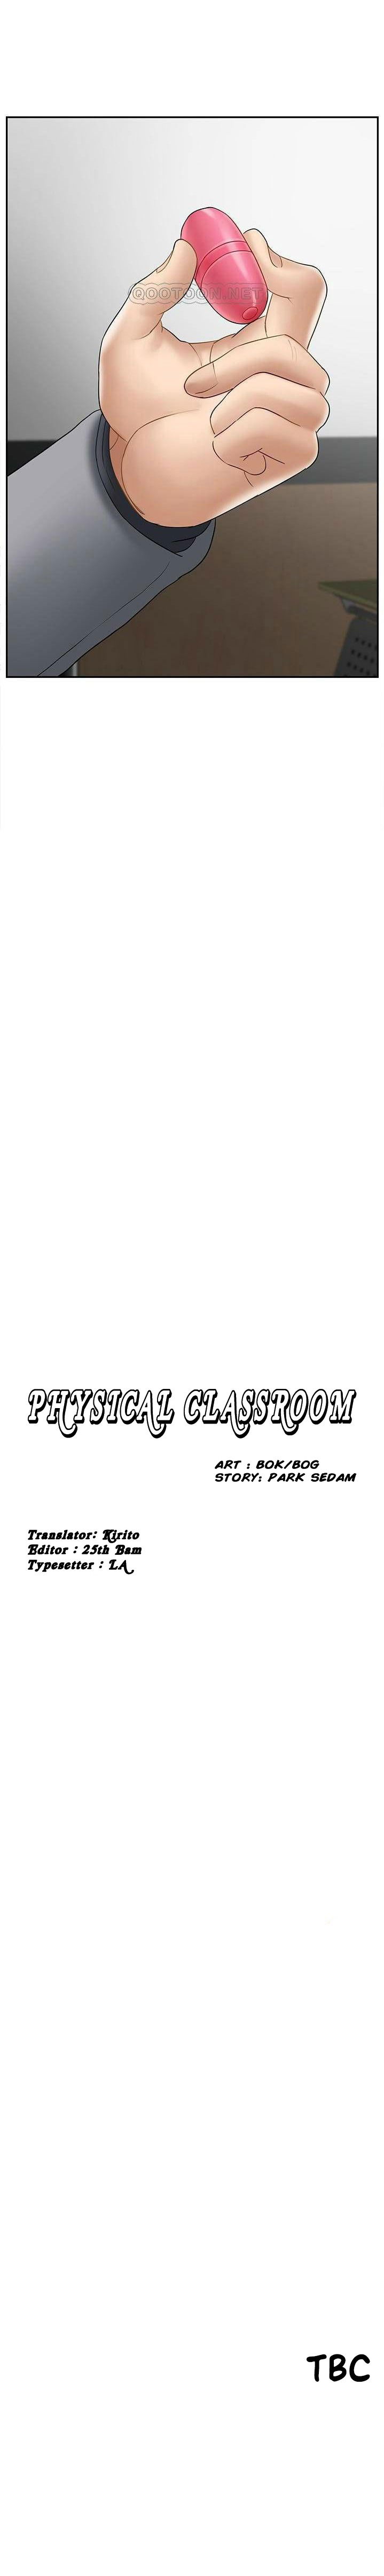 physical-classroom-chap-24-31